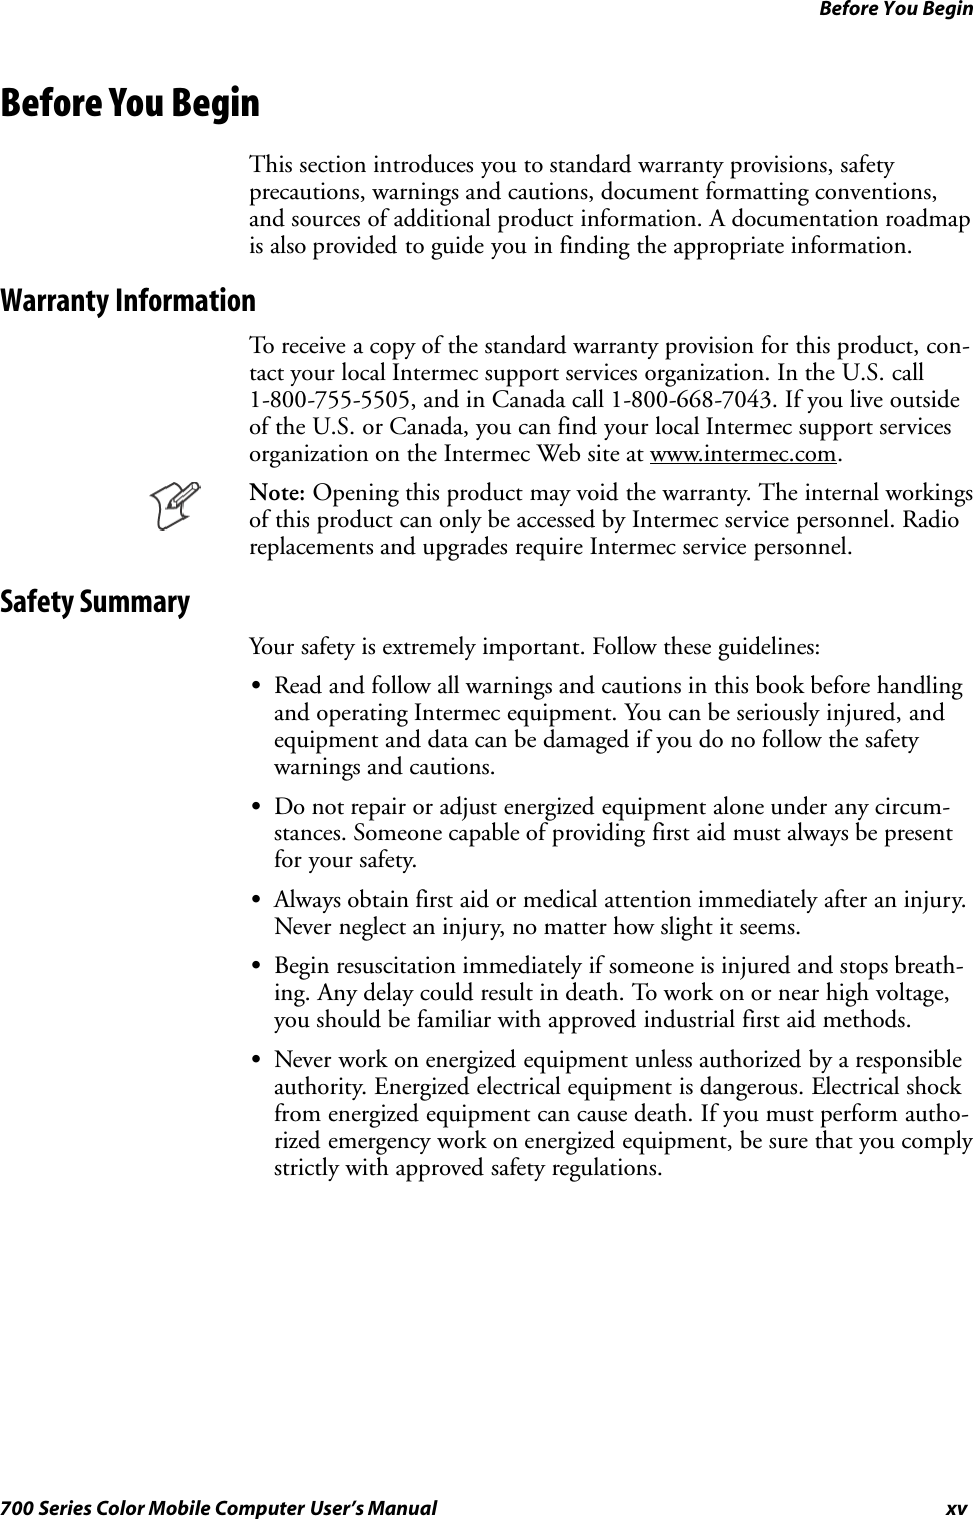 Before You Beginxv700 Series Color Mobile Computer User’s ManualBefore You BeginThis section introduces you to standard warranty provisions, safetyprecautions, warnings and cautions, document formatting conventions,and sources of additional product information. A documentation roadmapis also provided to guide you in finding the appropriate information.Warranty InformationTo receive a copy of the standard warranty provision for this product, con-tact your local Intermec support services organization. In the U.S. call1-800-755-5505, and in Canada call 1-800-668-7043. If you live outsideof the U.S. or Canada, you can find your local Intermec support servicesorganization on the Intermec Web site at www.intermec.com.Note: Opening this product may void the warranty. The internal workingsof this product can only be accessed by Intermec service personnel. Radioreplacements and upgrades require Intermec service personnel.Safety SummaryYour safety is extremely important. Follow these guidelines:SRead and follow all warnings and cautions in this book before handlingand operating Intermec equipment. You can be seriously injured, andequipment and data can be damaged if you do no follow the safetywarnings and cautions.SDo not repair or adjust energized equipment alone under any circum-stances. Someone capable of providing first aid must always be presentforyoursafety.SAlways obtain first aid or medical attention immediately after an injury.Never neglect an injury, no matter how slight it seems.SBegin resuscitation immediately if someone is injured and stops breath-ing. Any delay could result in death. To work on or near high voltage,you should be familiar with approved industrial first aid methods.SNever work on energized equipment unless authorized by a responsibleauthority. Energized electrical equipment is dangerous. Electrical shockfrom energized equipment can cause death. If you must perform autho-rized emergency work on energized equipment, be sure that you complystrictly with approved safety regulations.